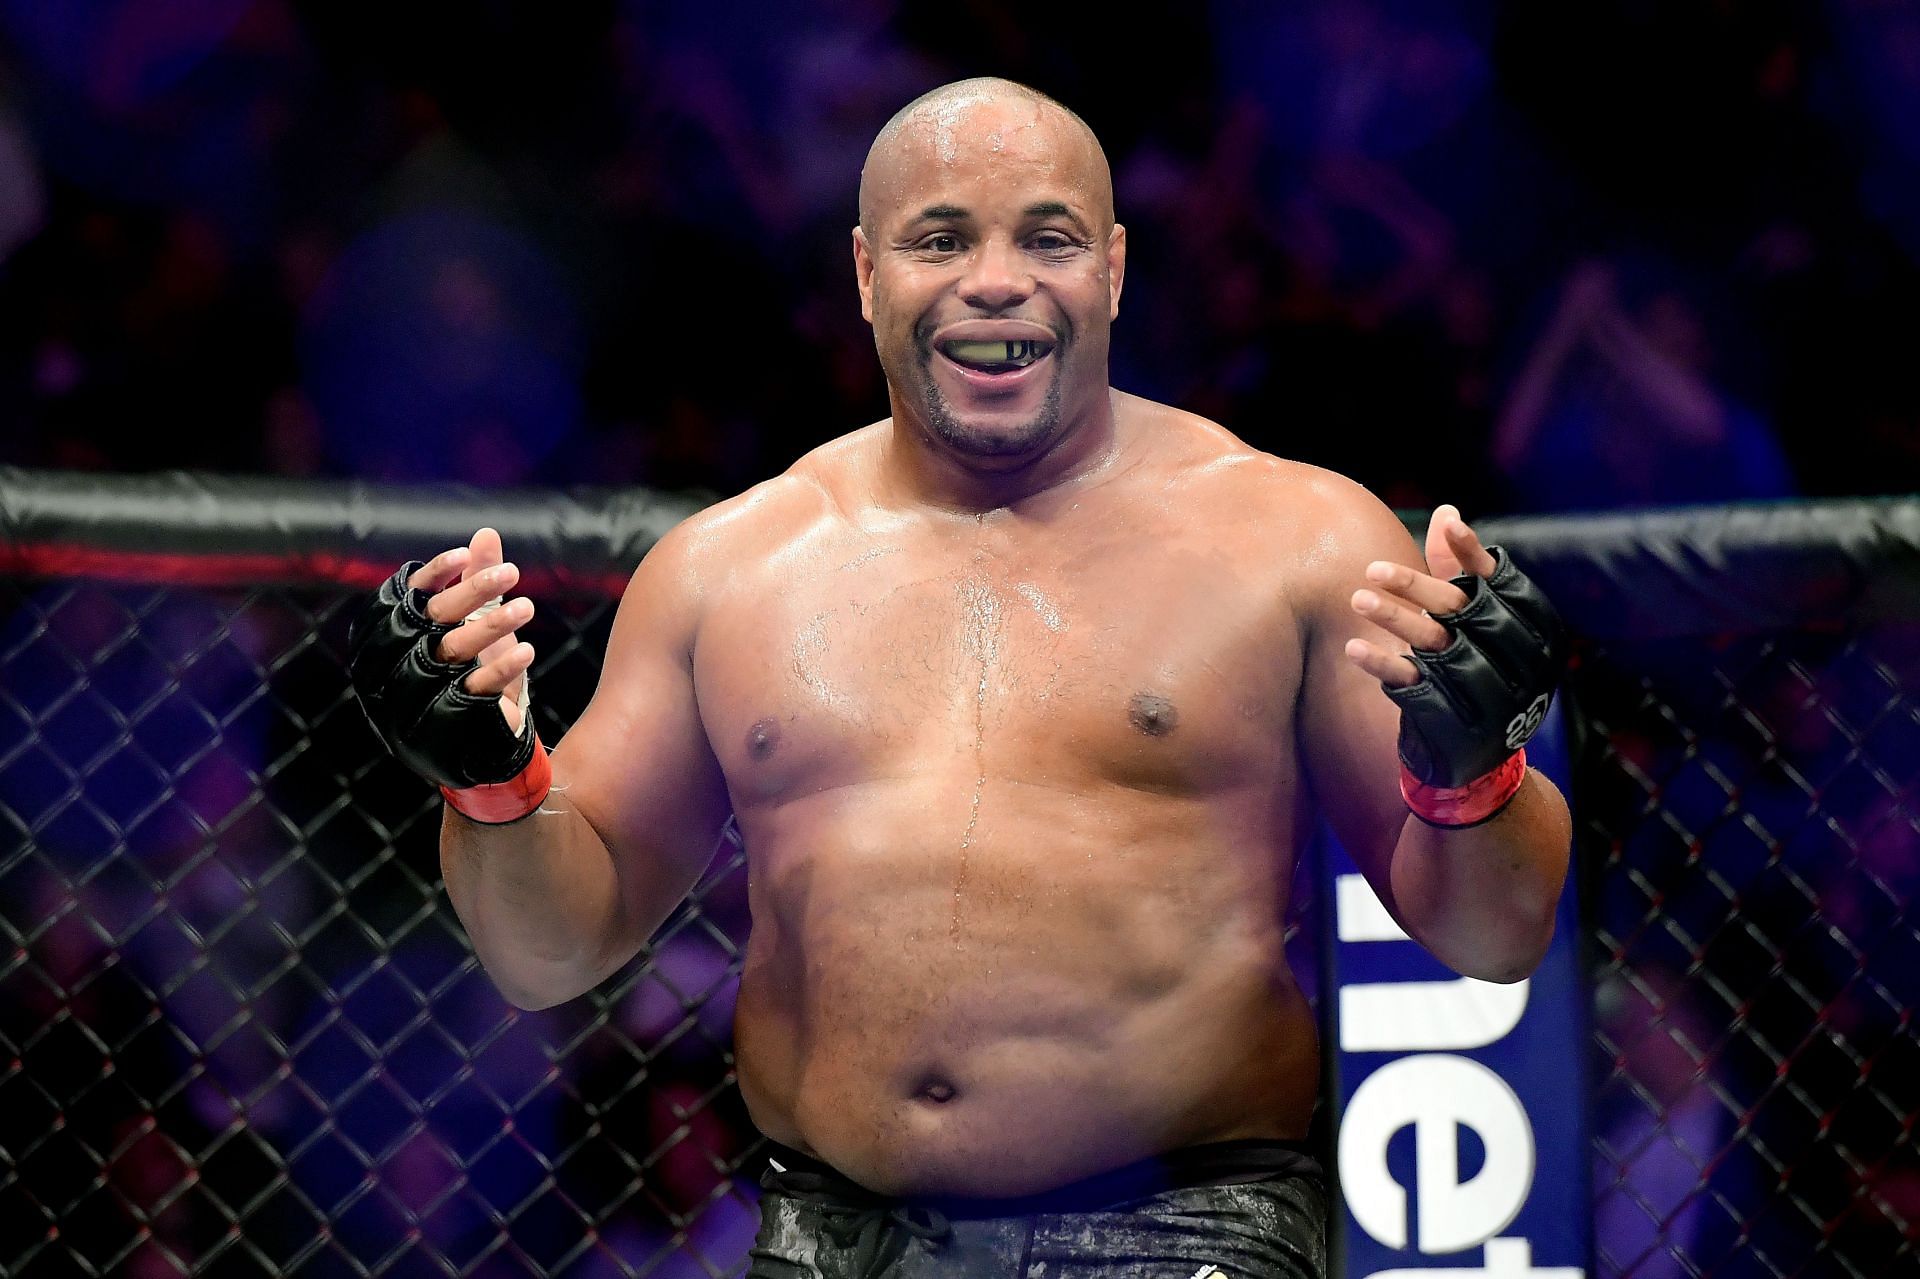 Cormier finished his career with a record of 22-3 (1NC)